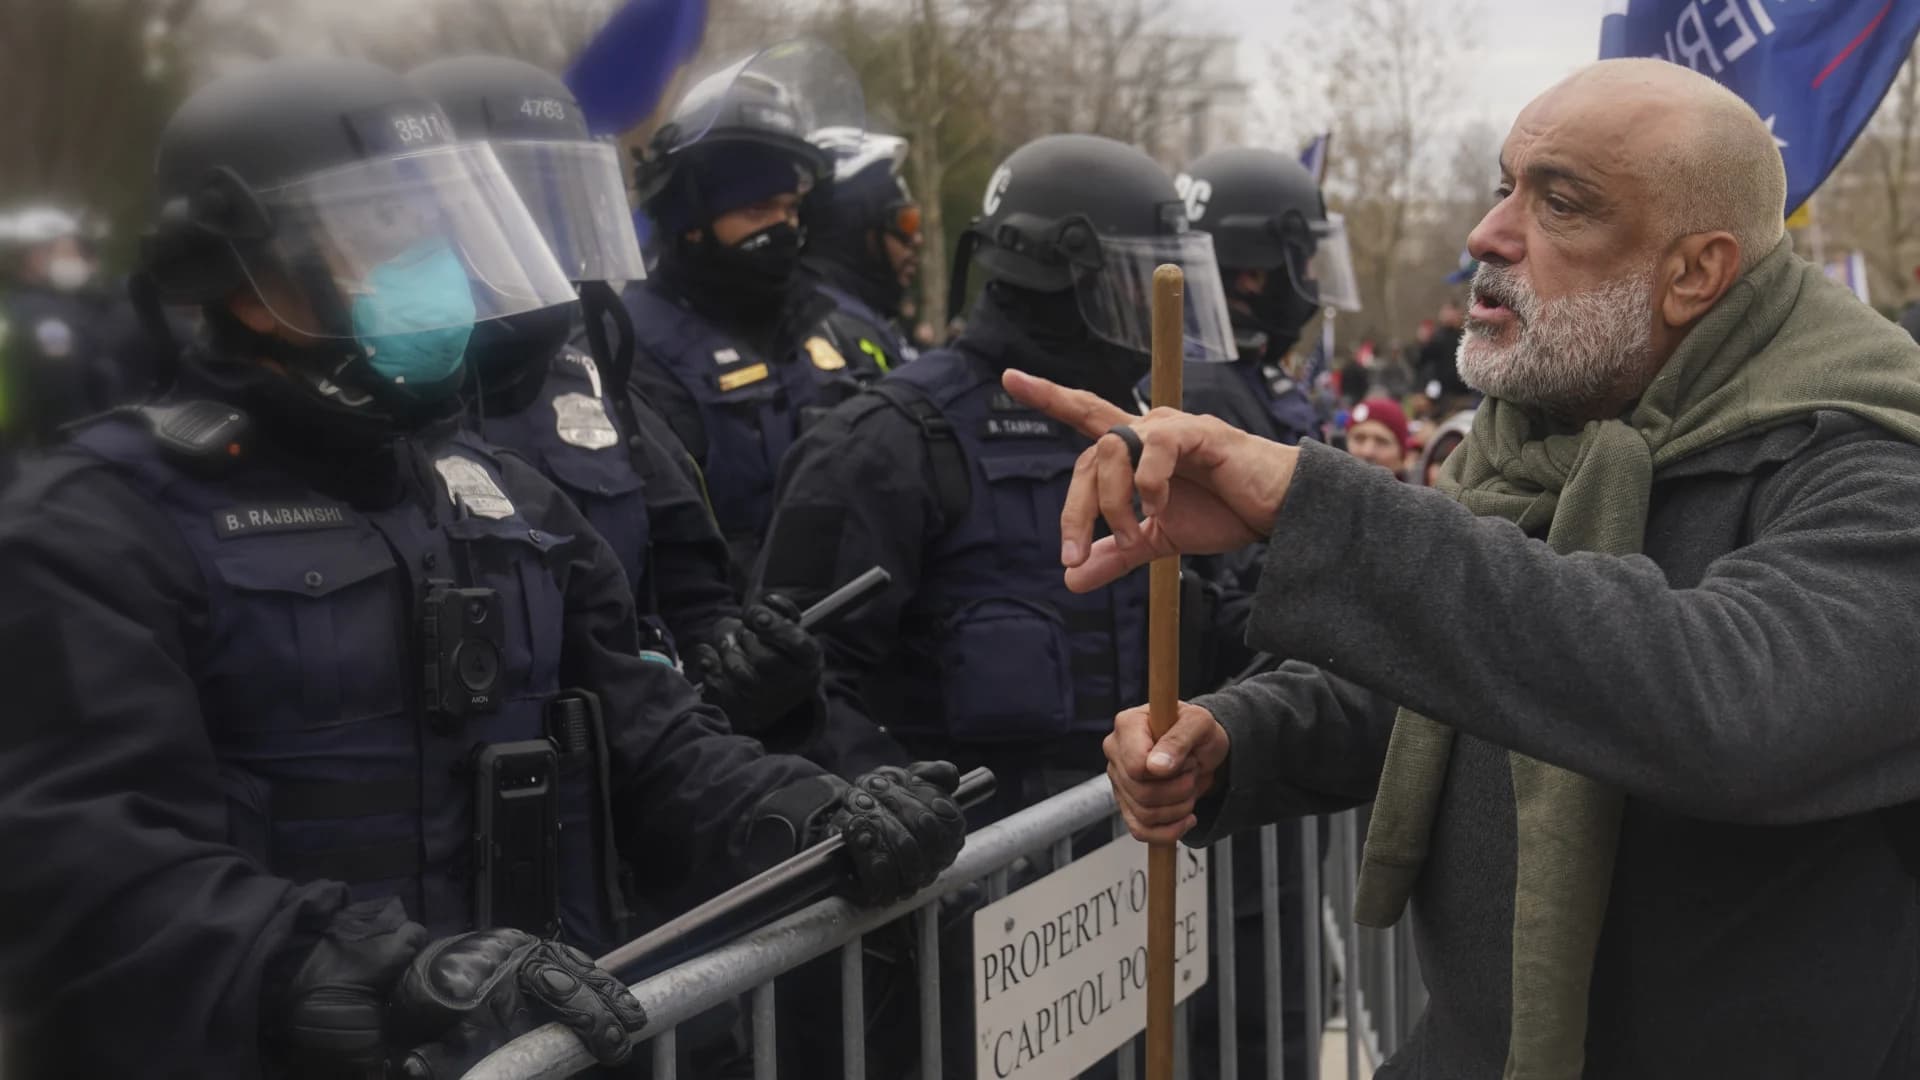 Insurrection prompts year of change for US Capitol Police